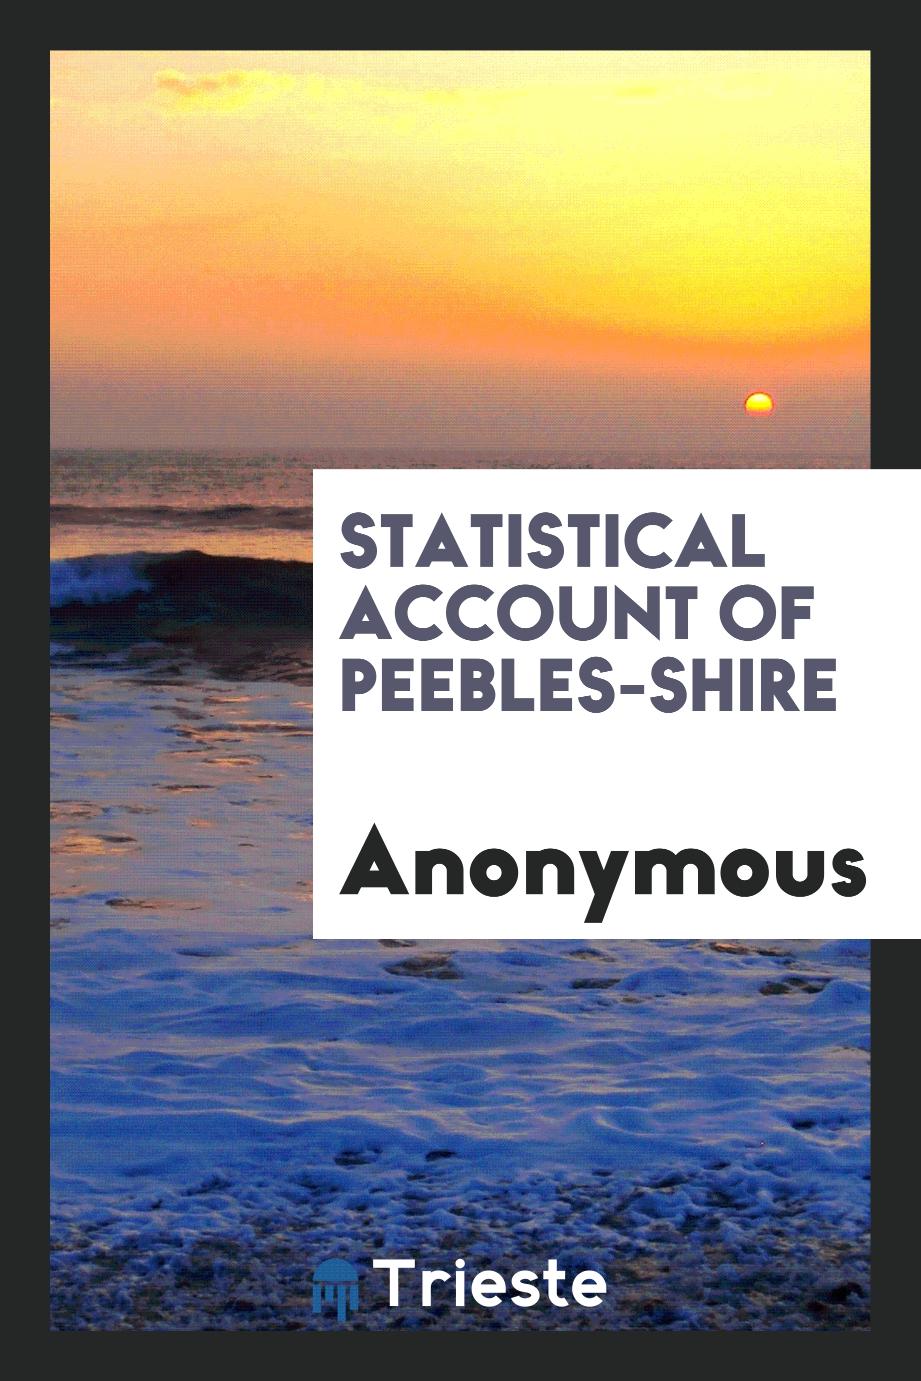 Statistical Account of Peebles-Shire